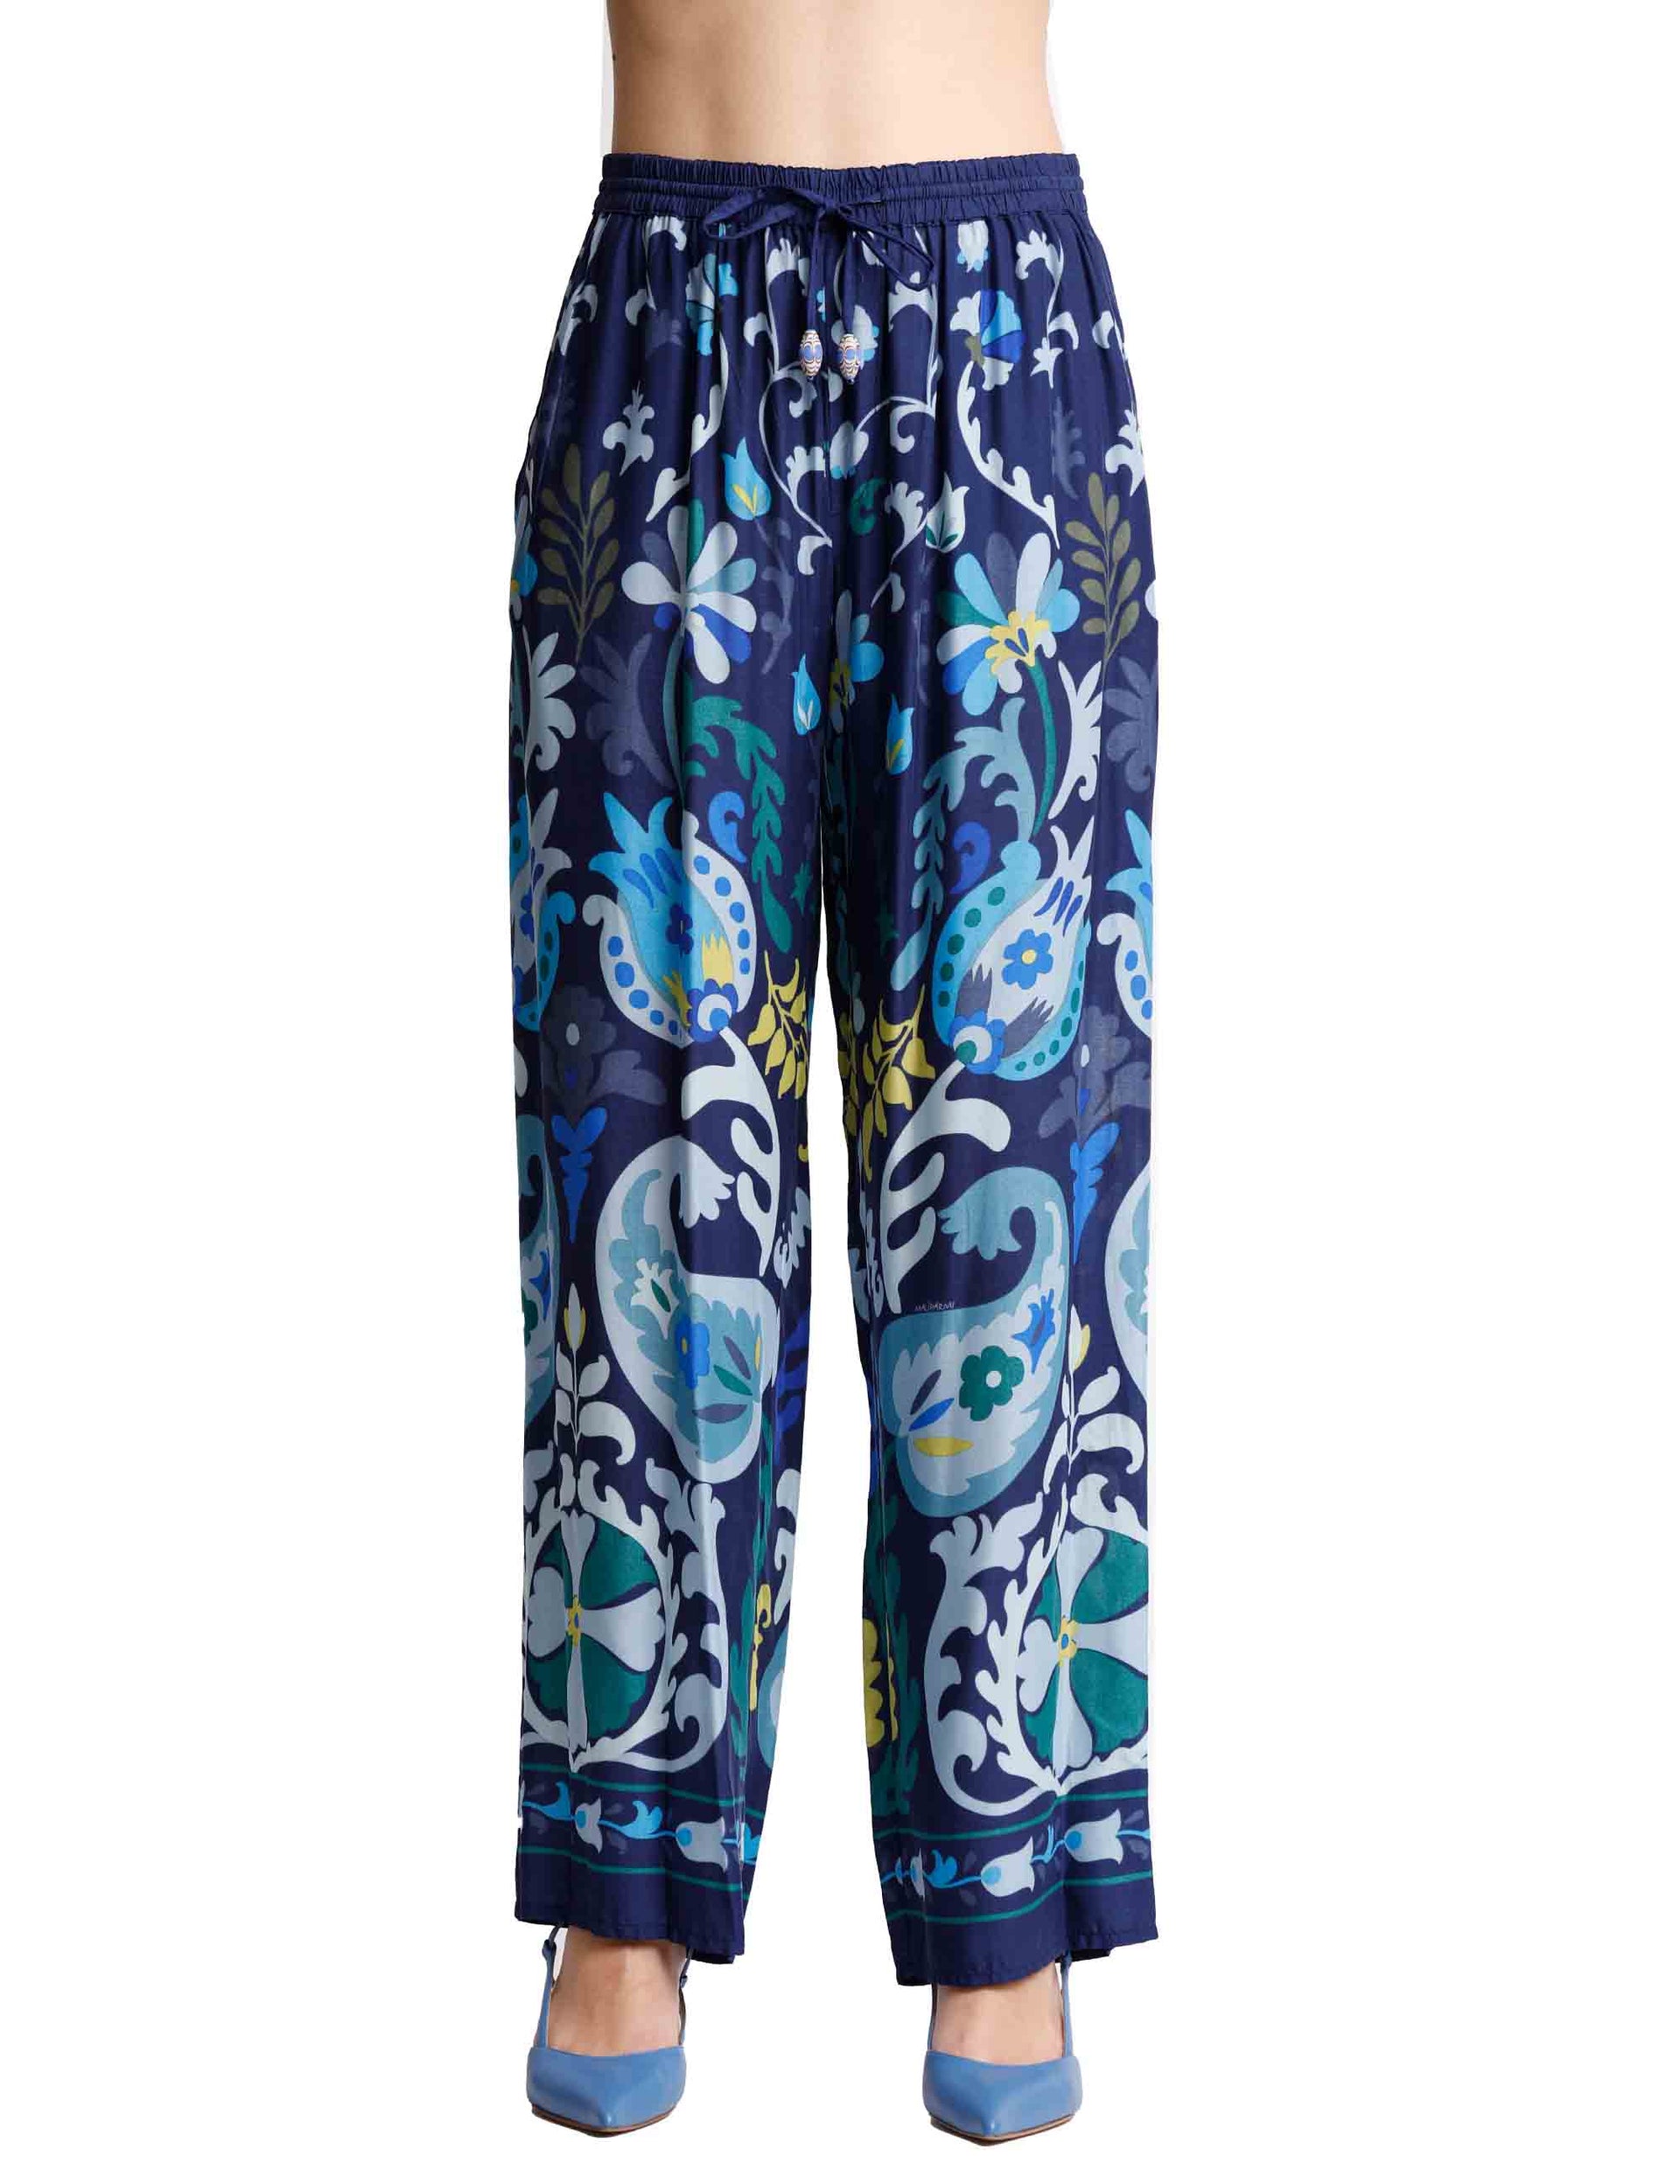 Fortuna Print women's trousers in natural blue viscose with soft leg